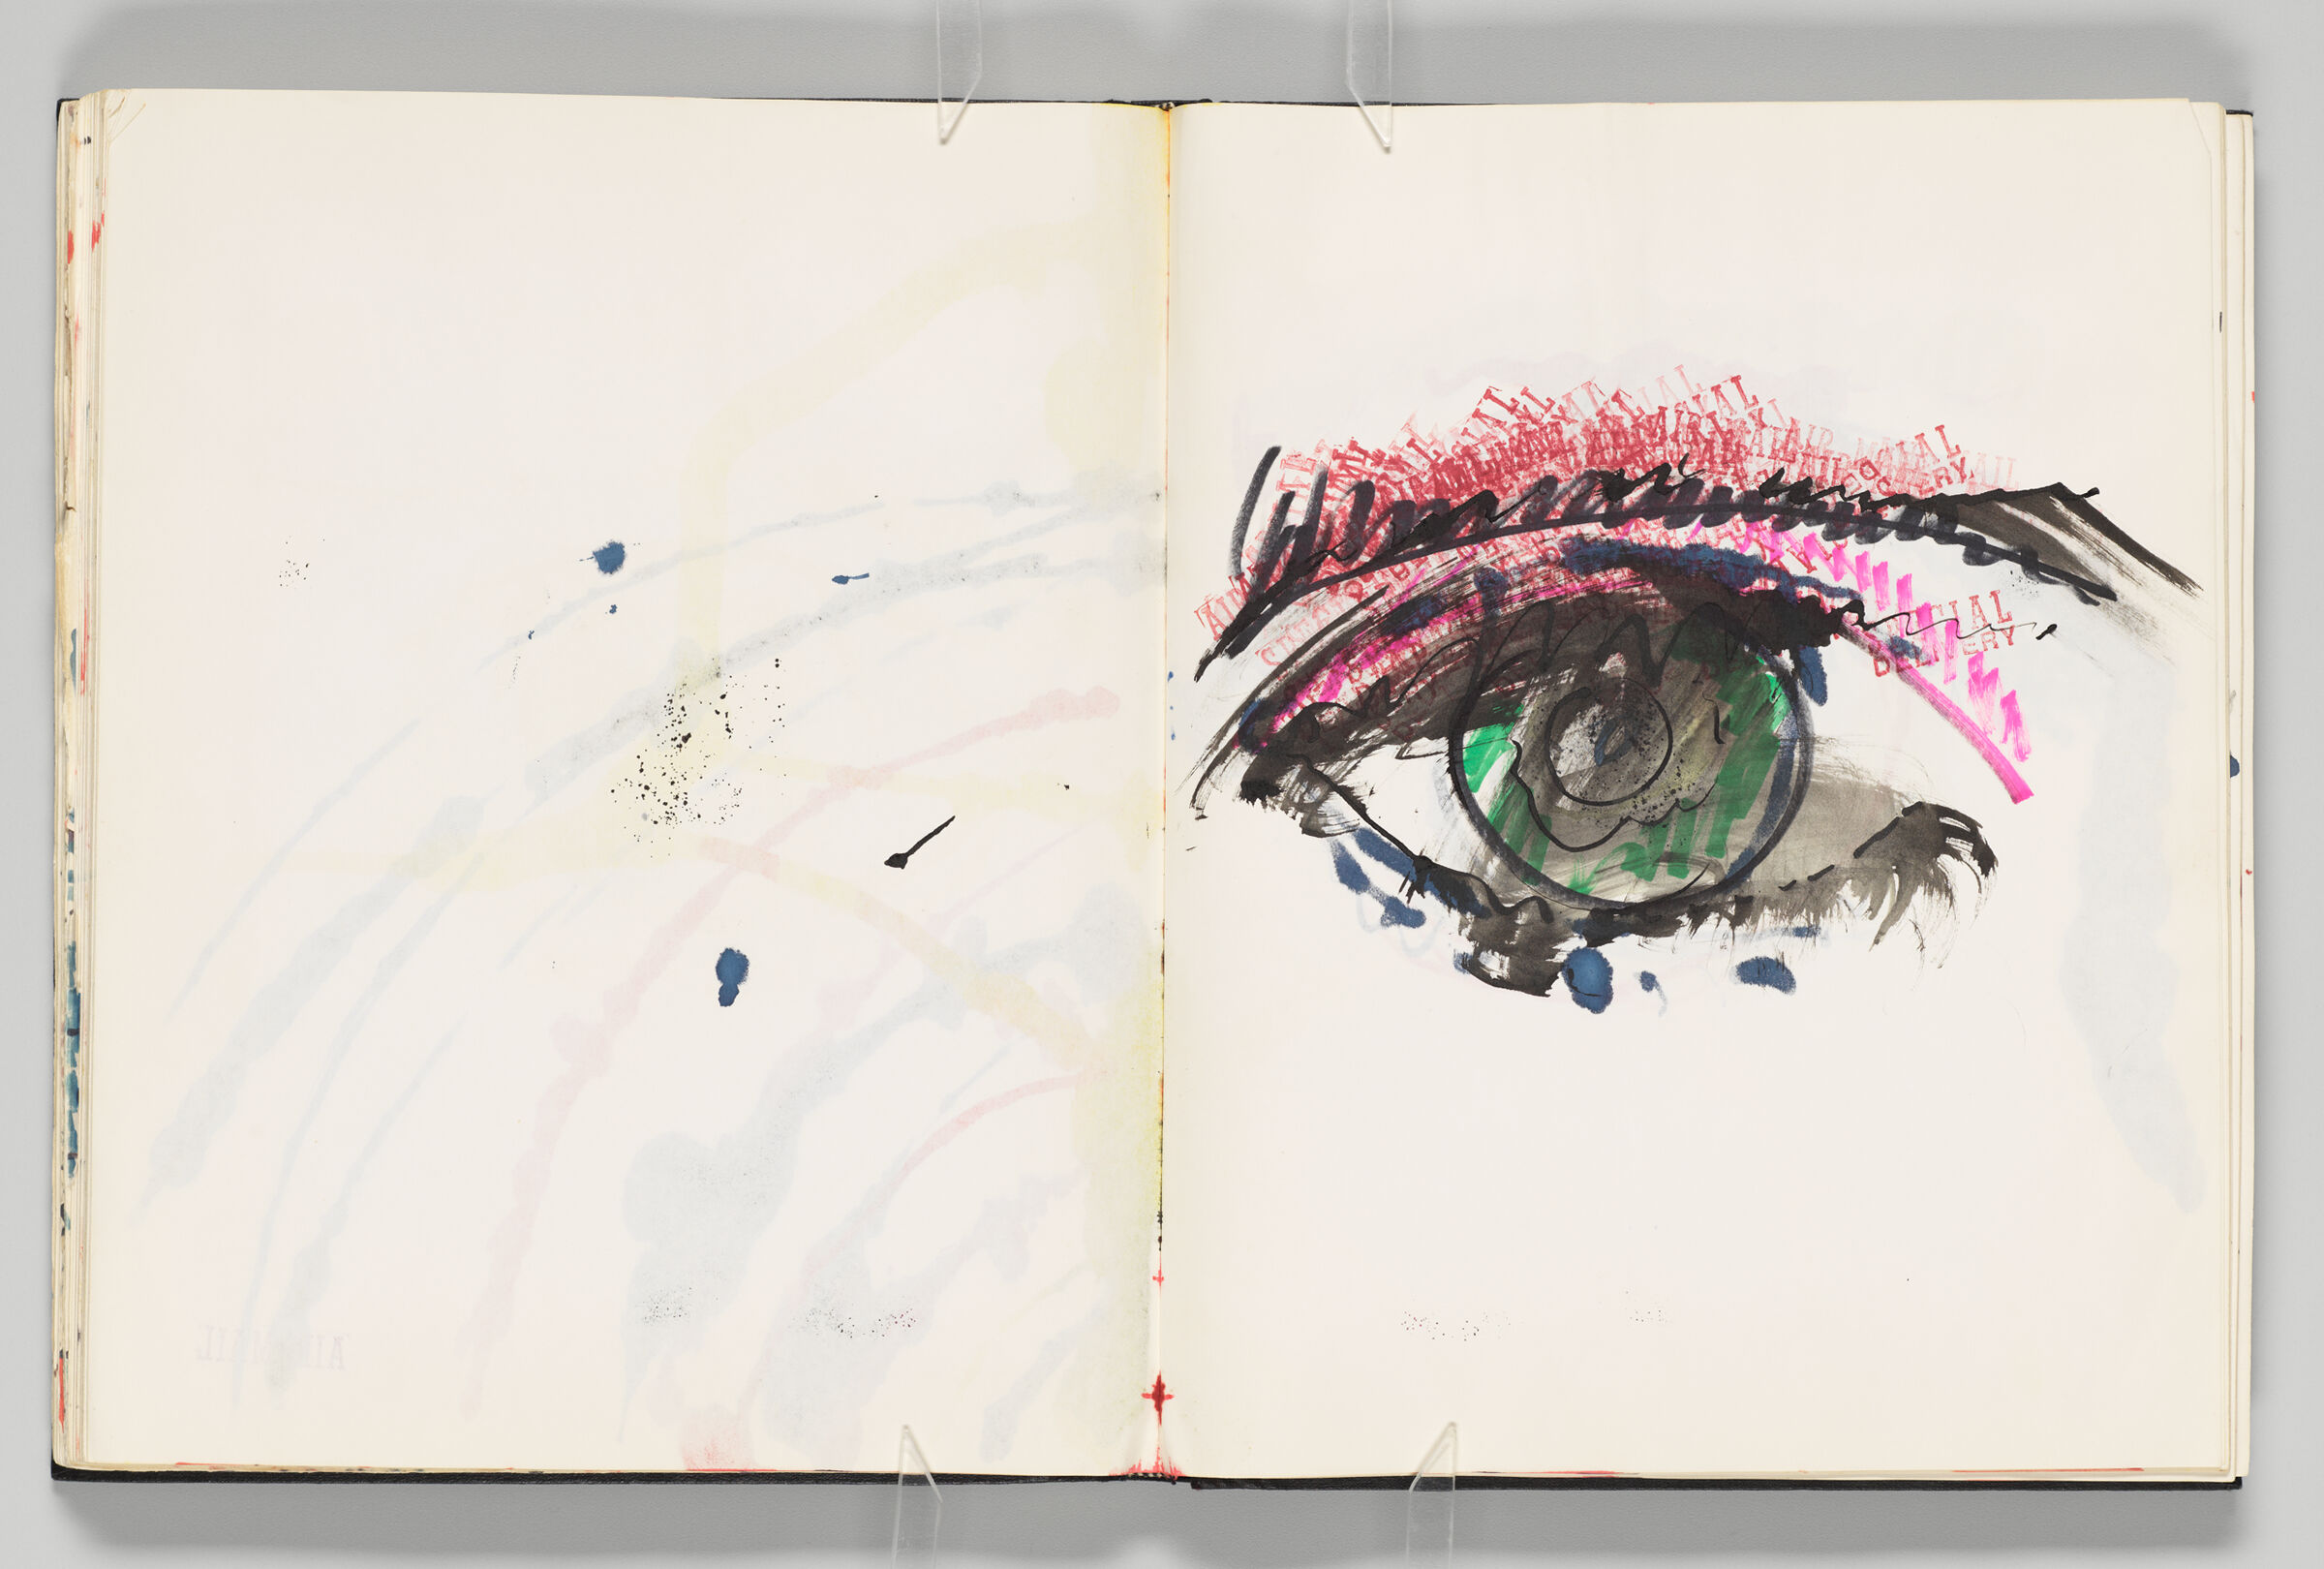 Untitled (Bleed-Through Of Previous Page, Left Page); Untitled (Eye, Right Page)